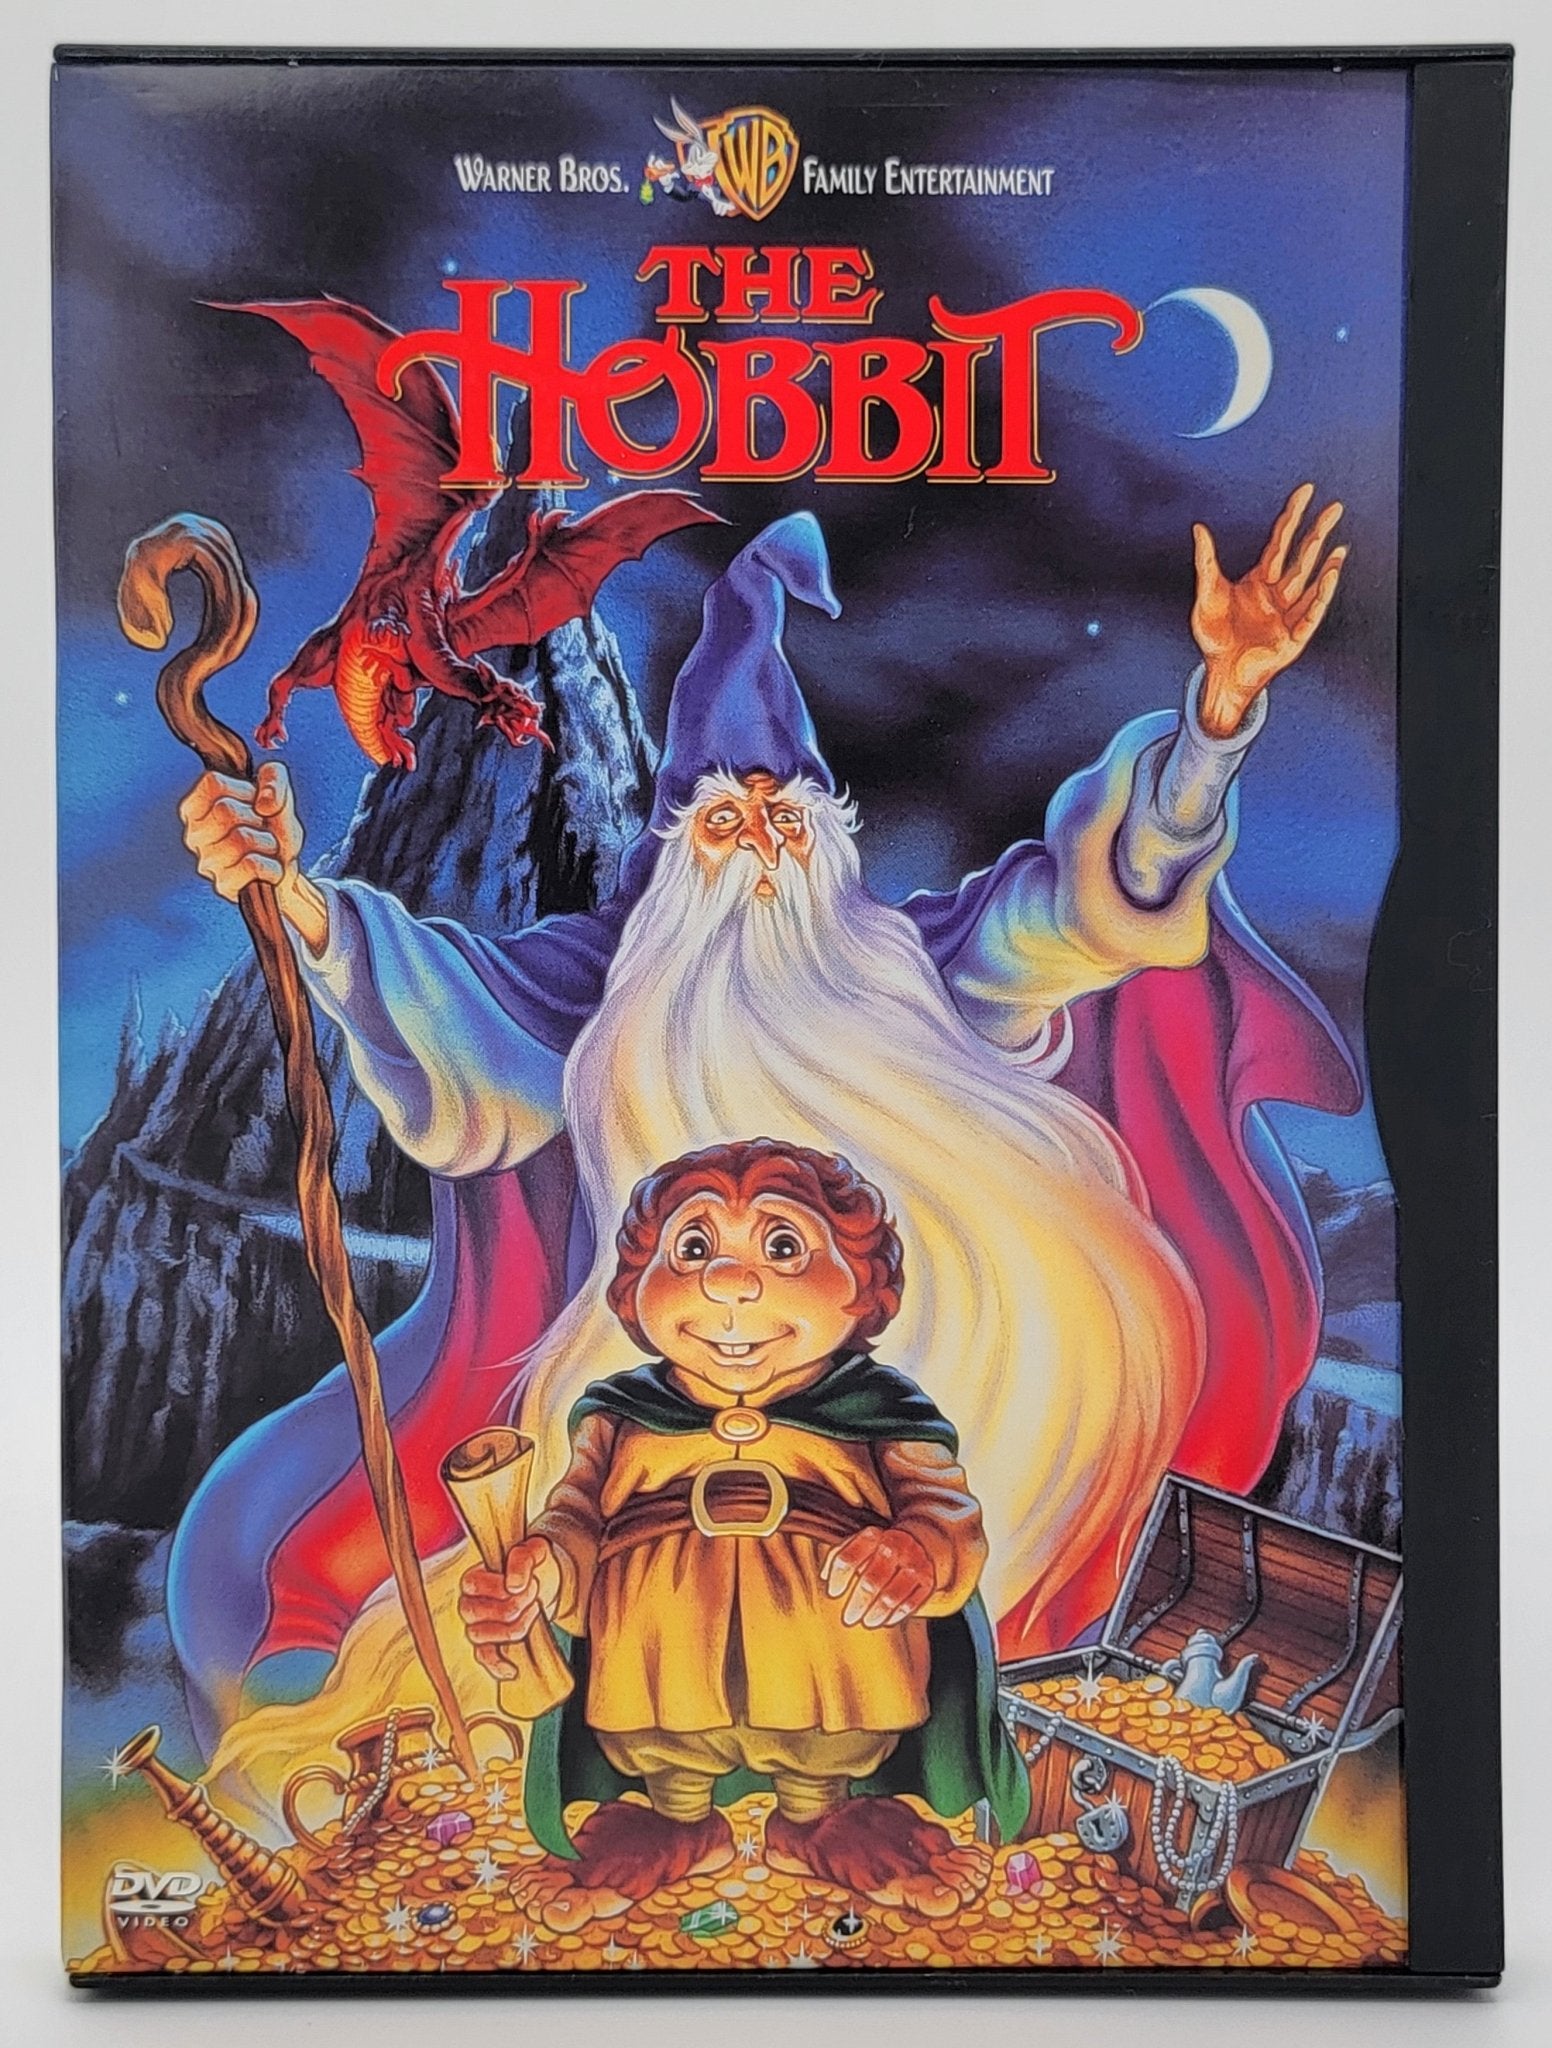 Warner Brother Family Entertainment - The Hobbit 1977 | DVD | Animation - DVD - Steady Bunny Shop